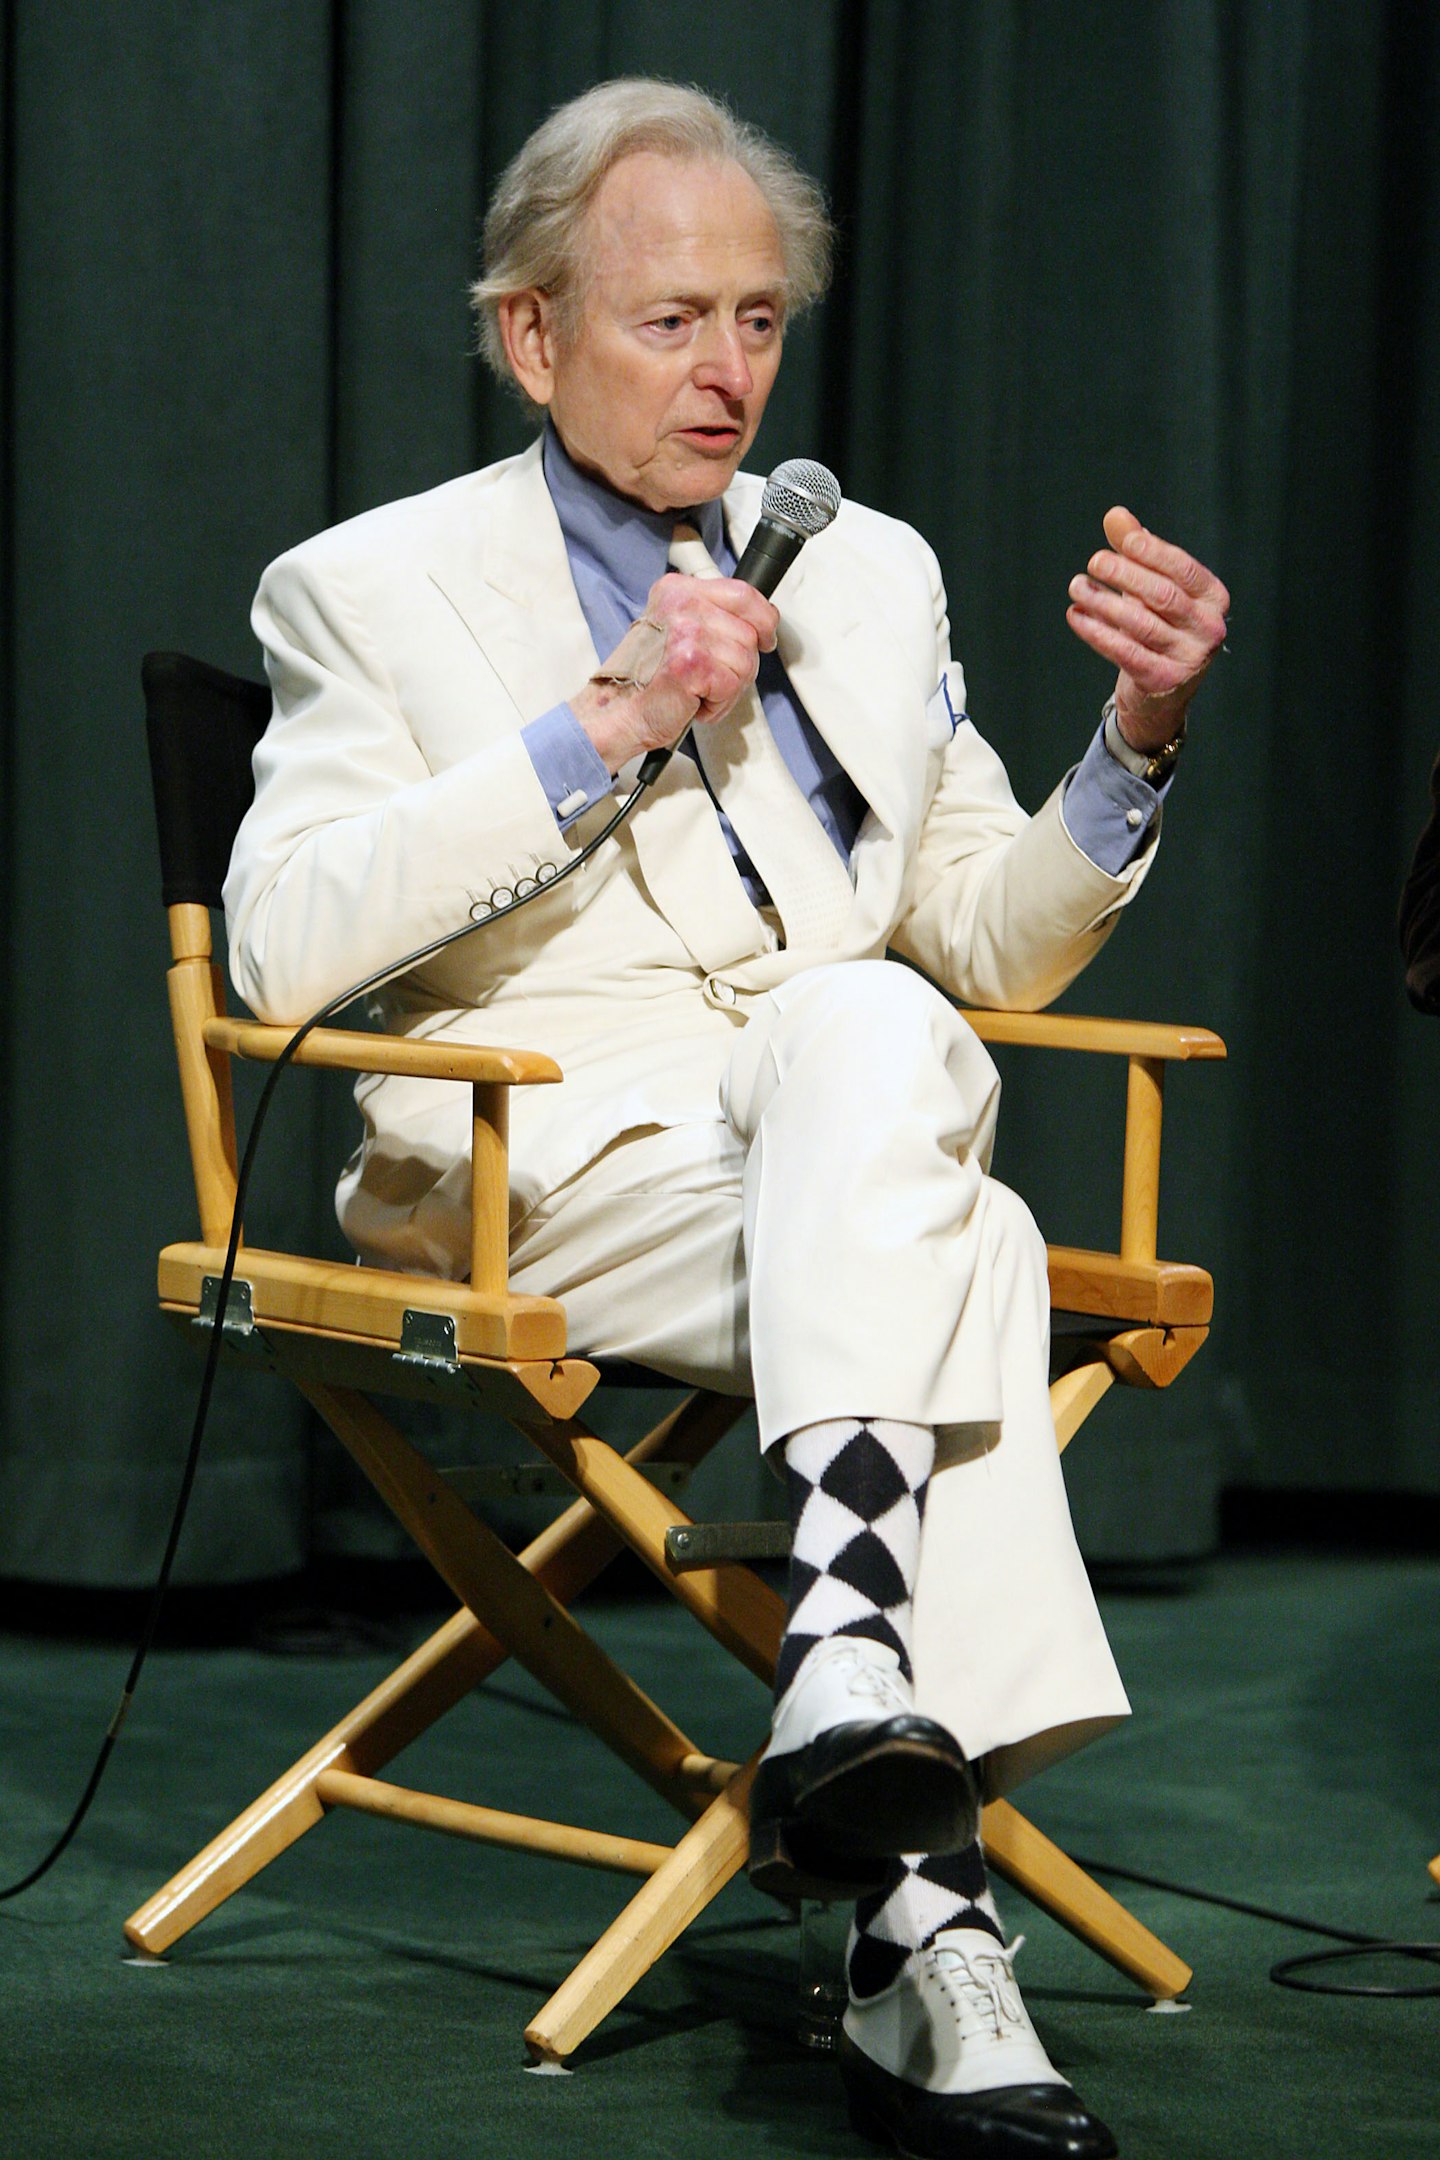 Tom Wolfe Writer White Suit